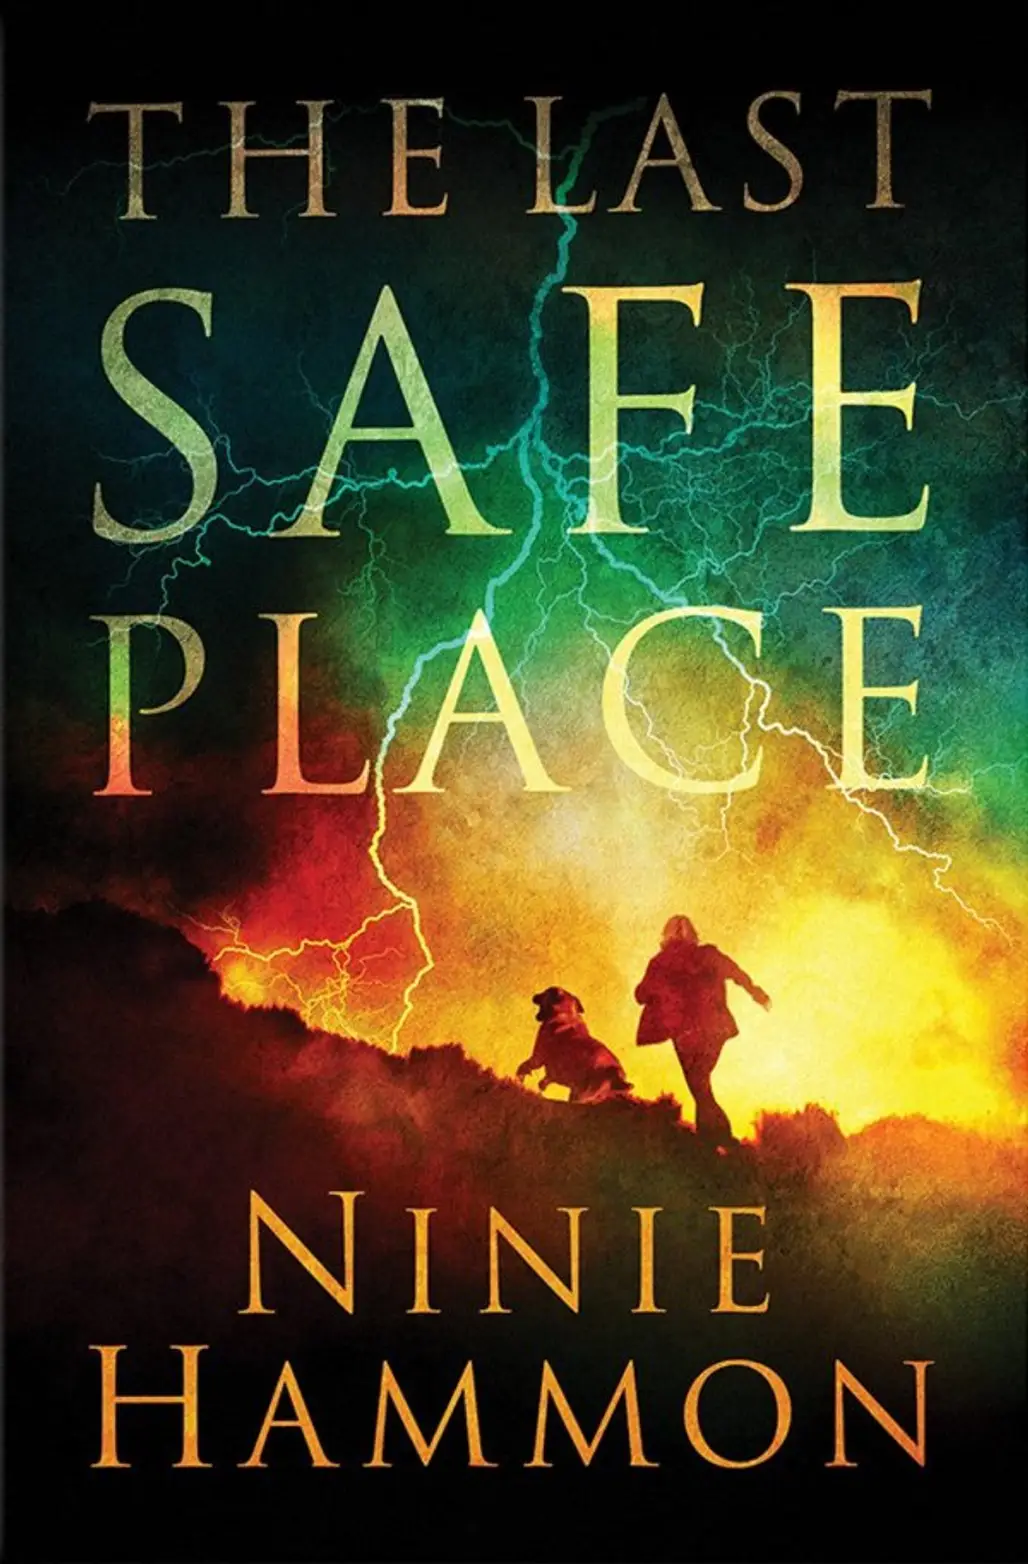 The Last Safe Place by Ninie Hammon